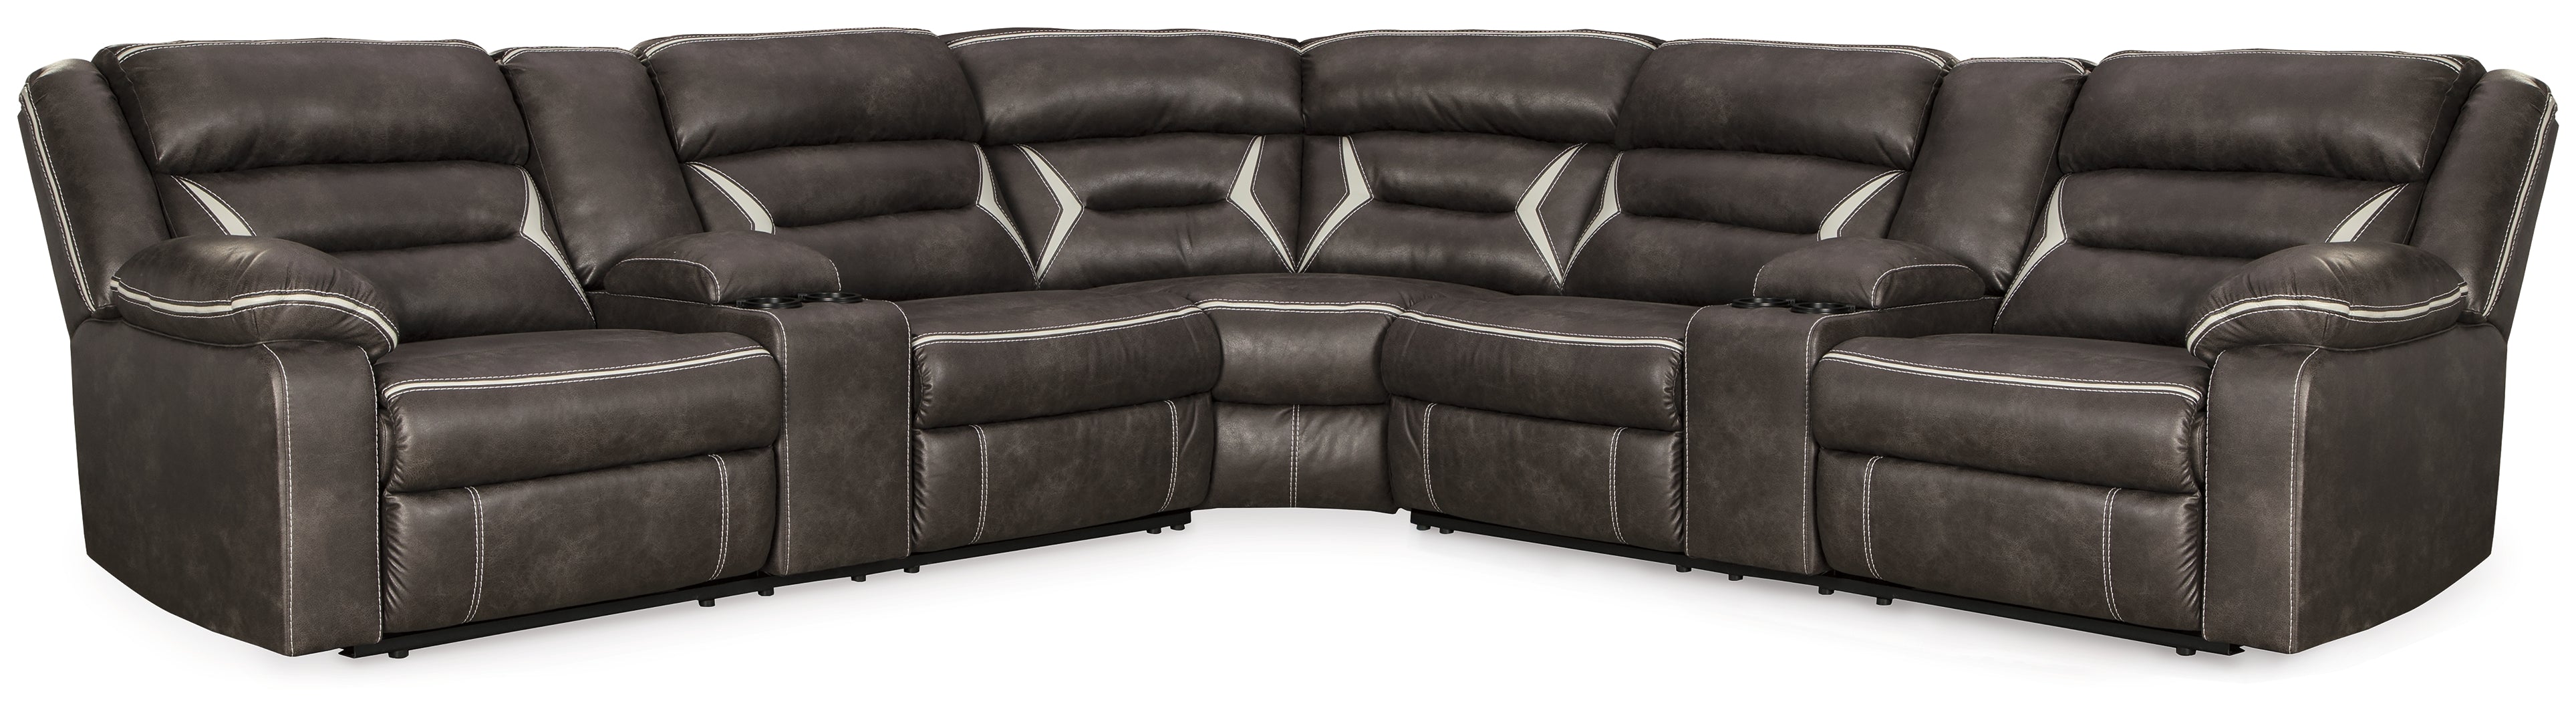 Kincord 3-Piece Power Reclining Sectional